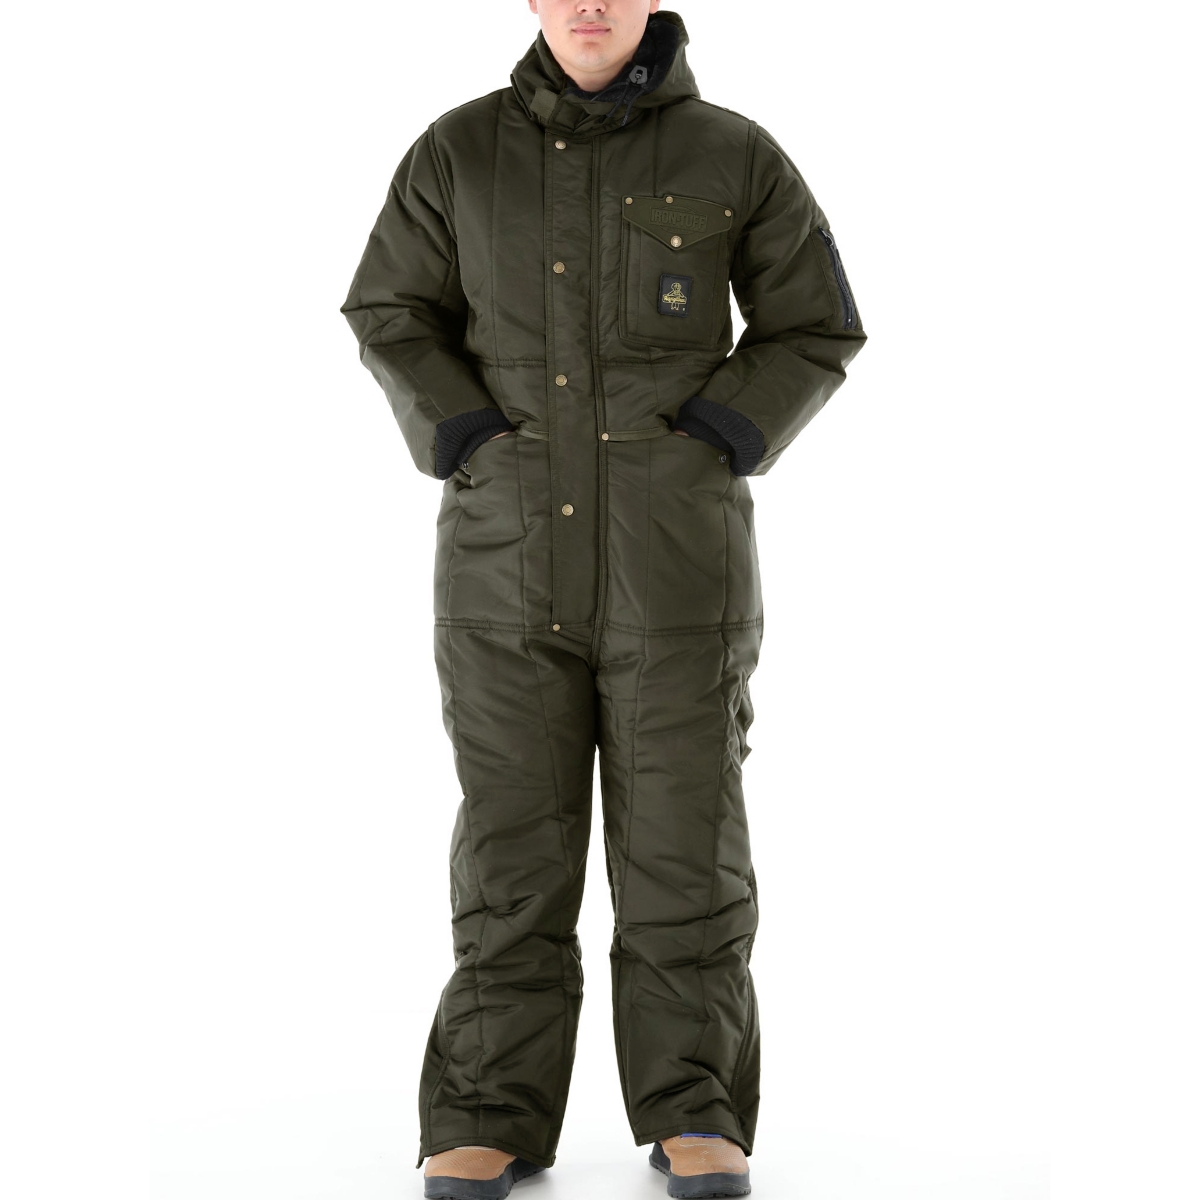 Men's Iron-Tuff Insulated Coveralls with Hood -50F Cold Protection - Sage